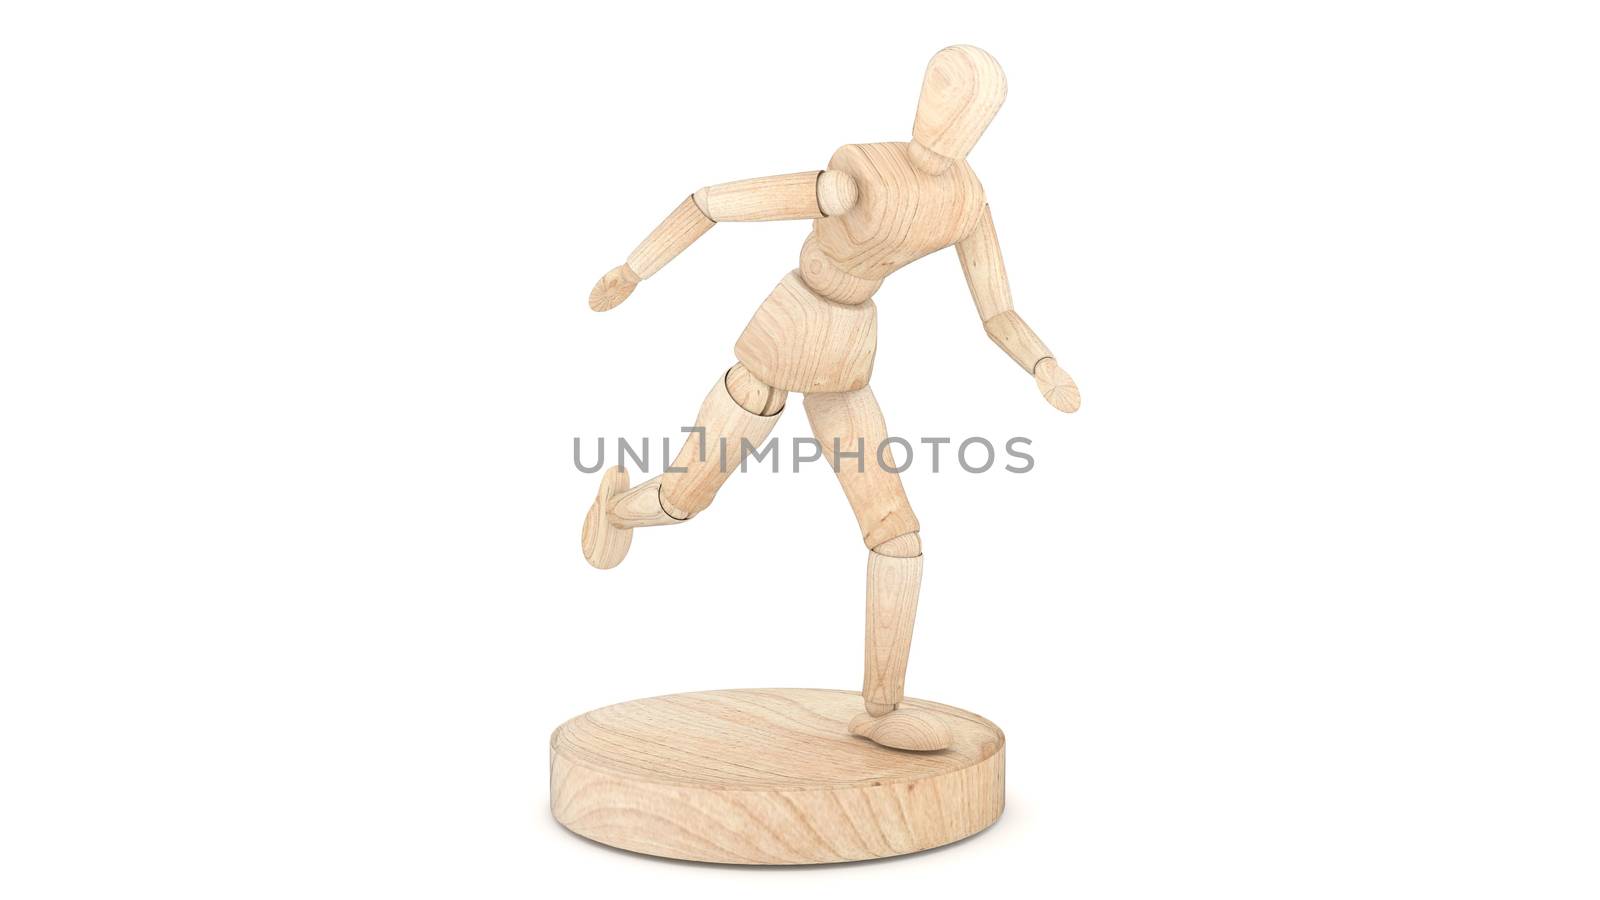 Run Wooden Dummy. 3D rendering by Minny0012011@hotmail.com